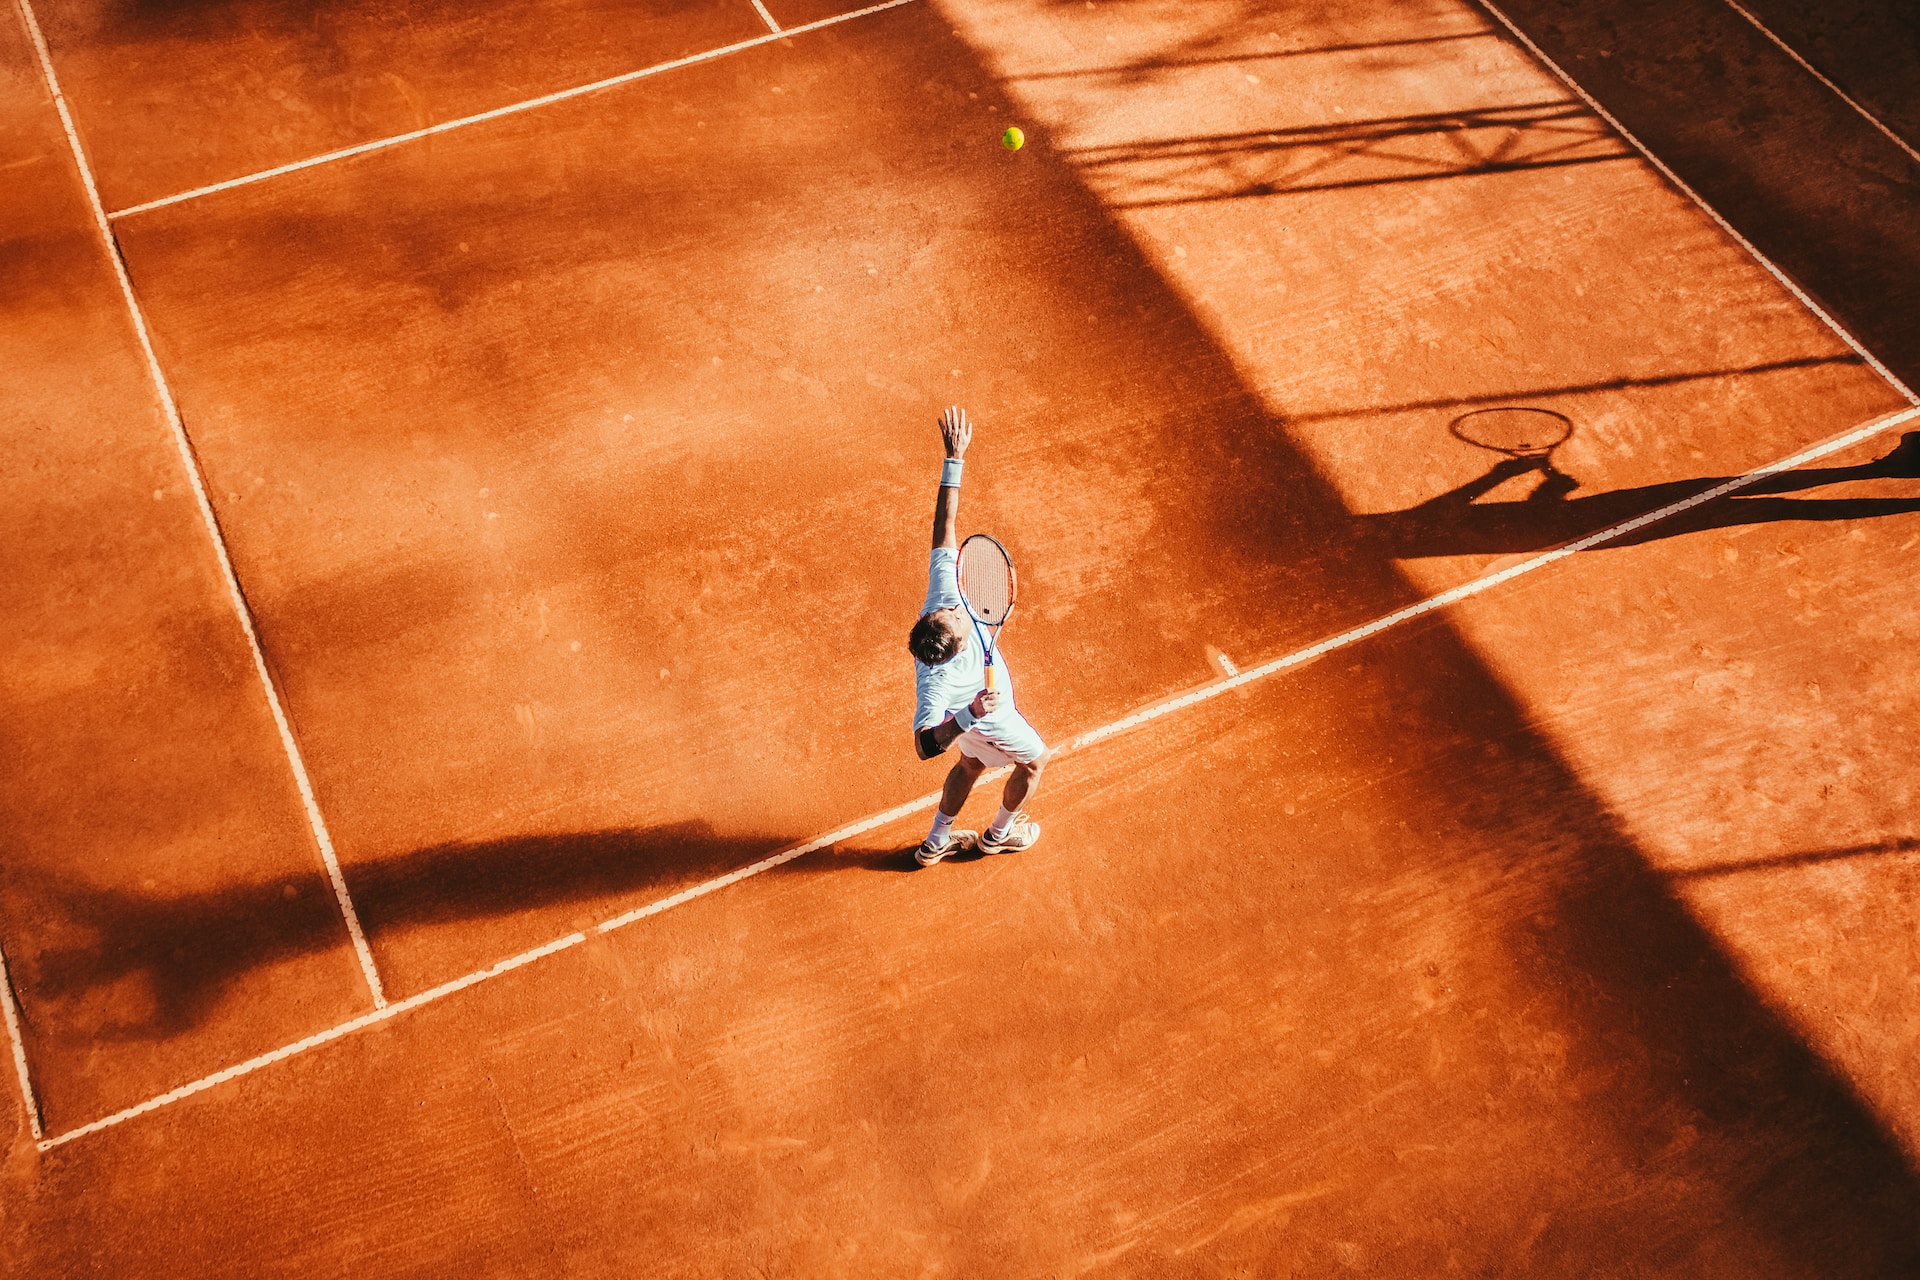 5 Strategies for Developing a Winning Strategy for Tennis Bets